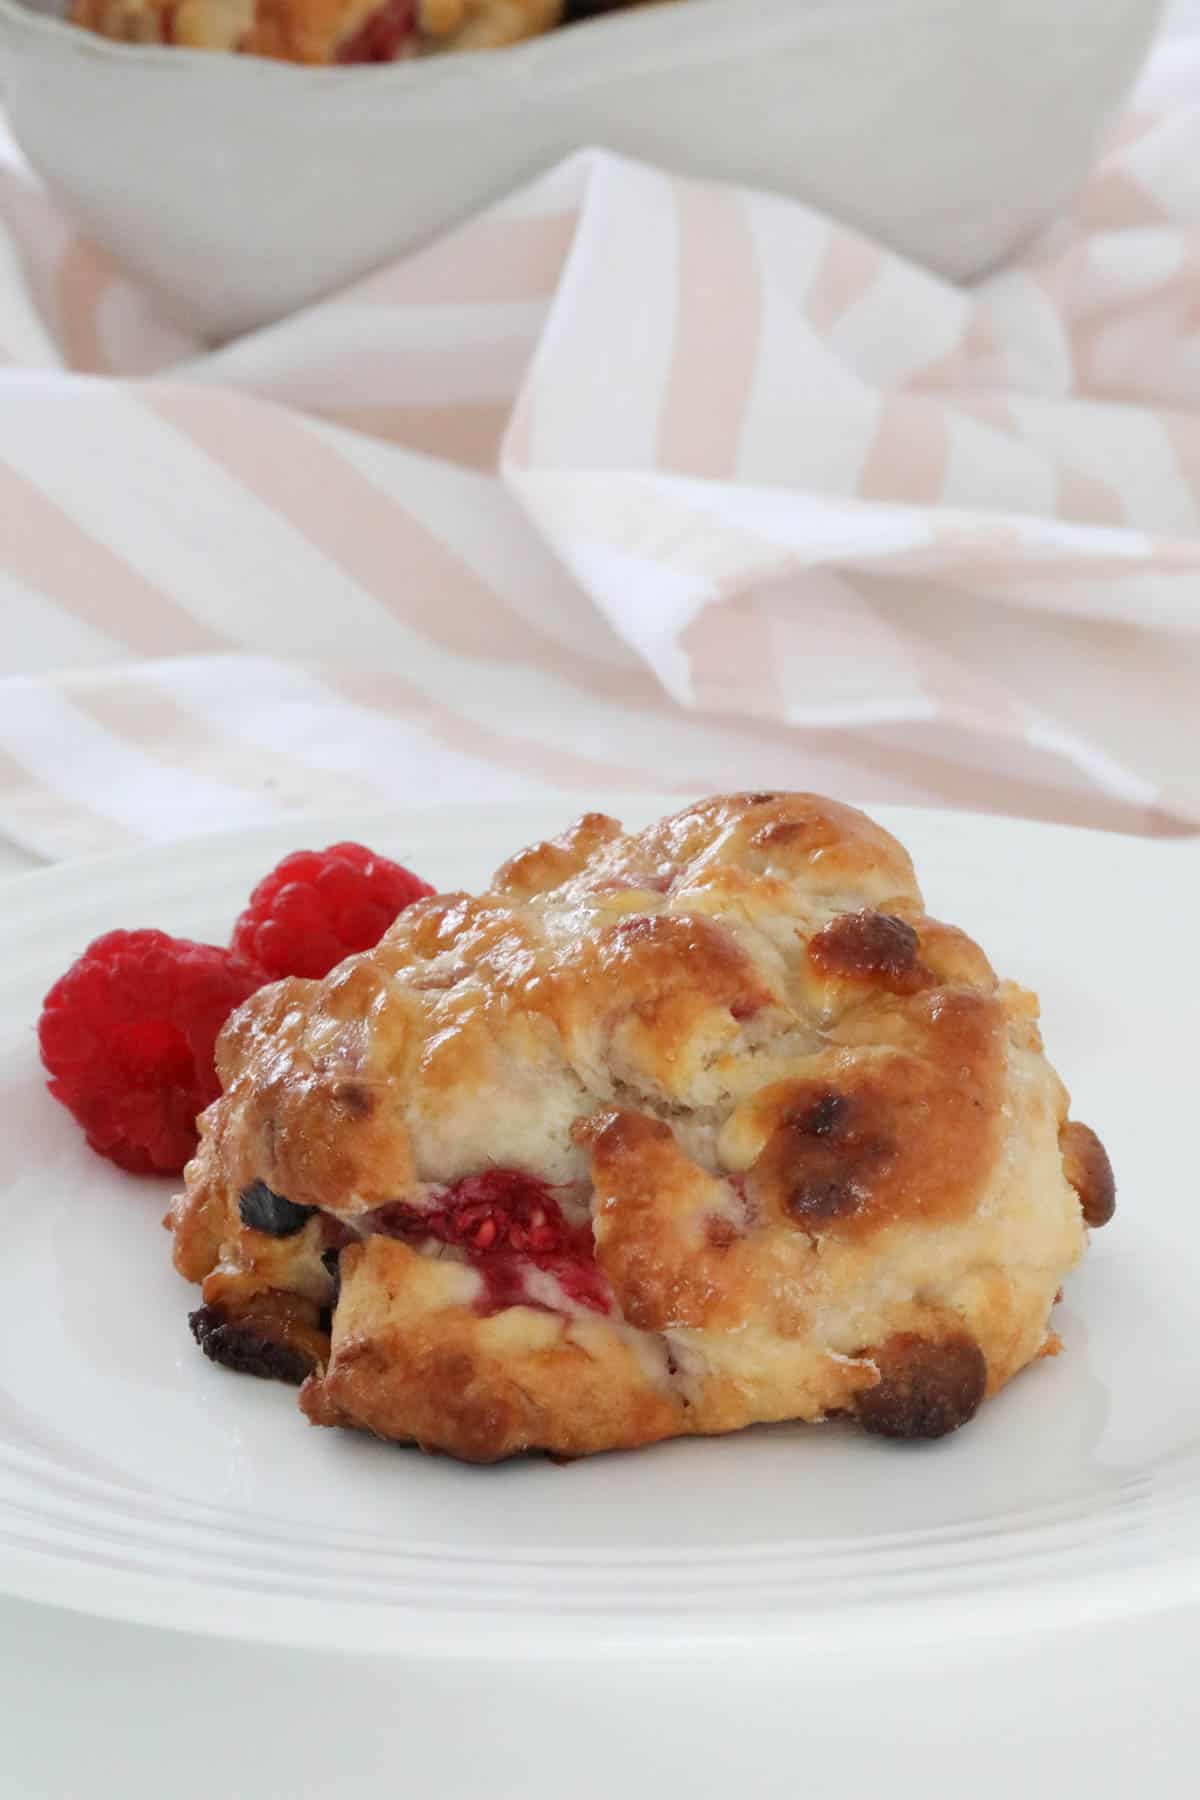 A scone on a plate with two fresh raspberries placed beside it.